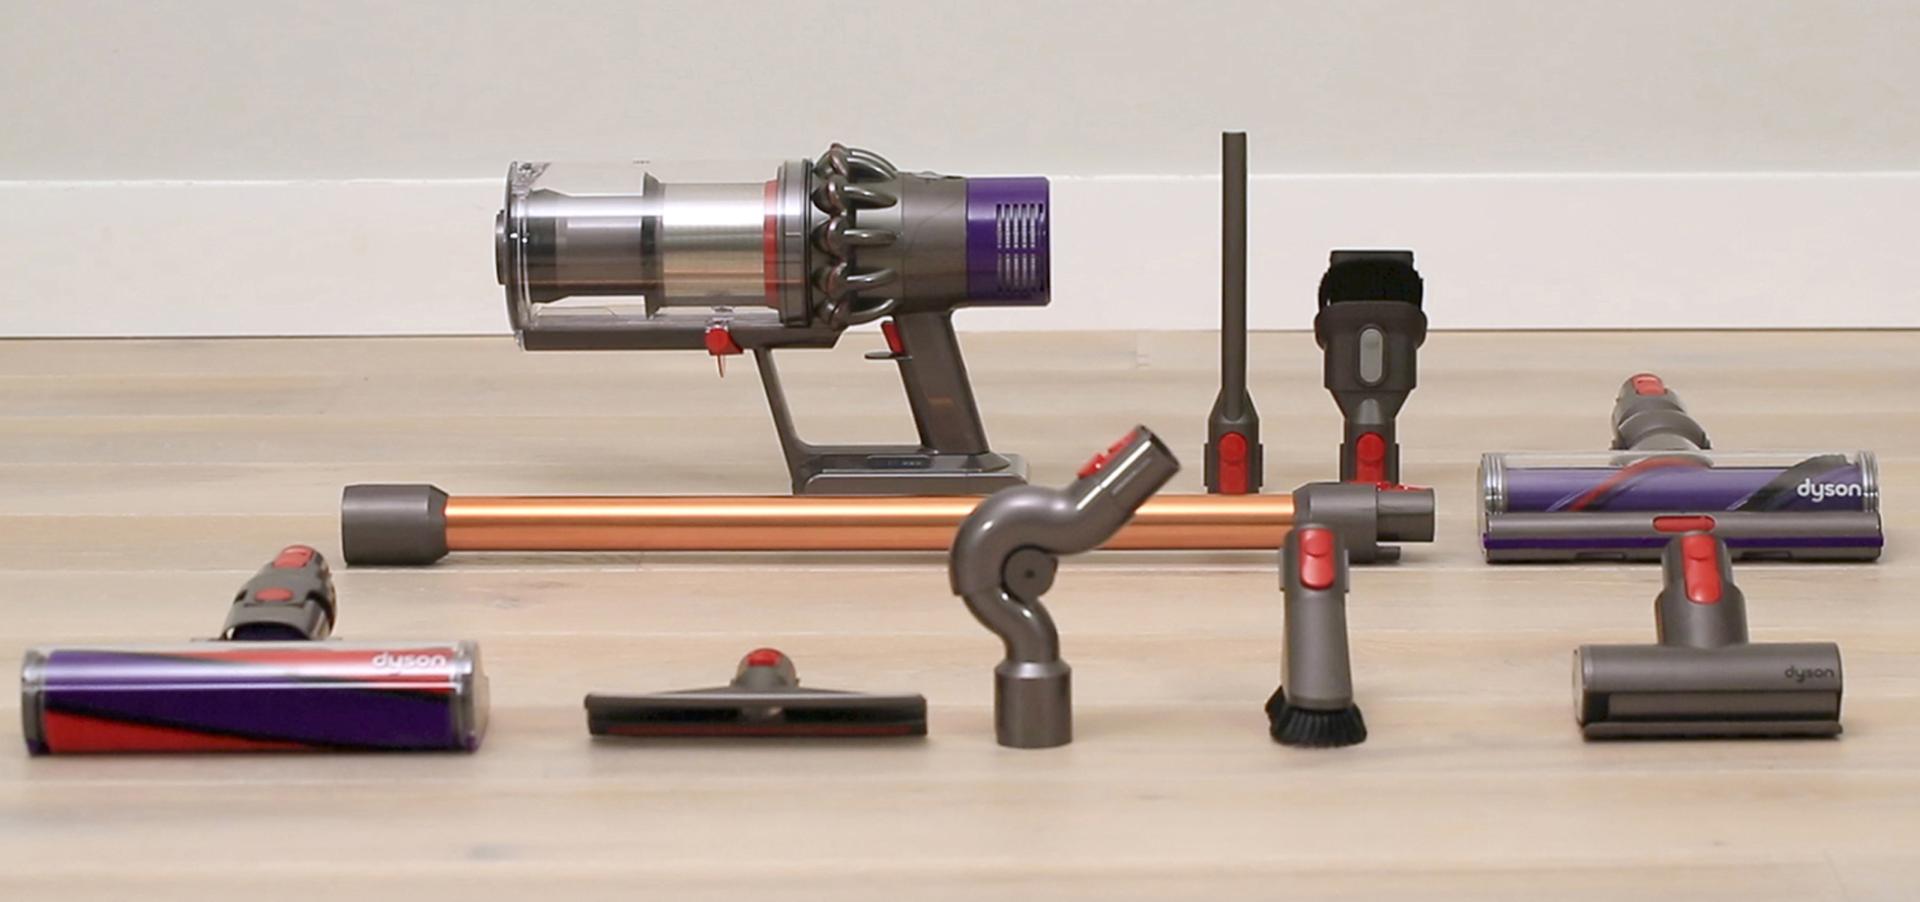 Dyson Cyclone V10 vacuum and tools laid out